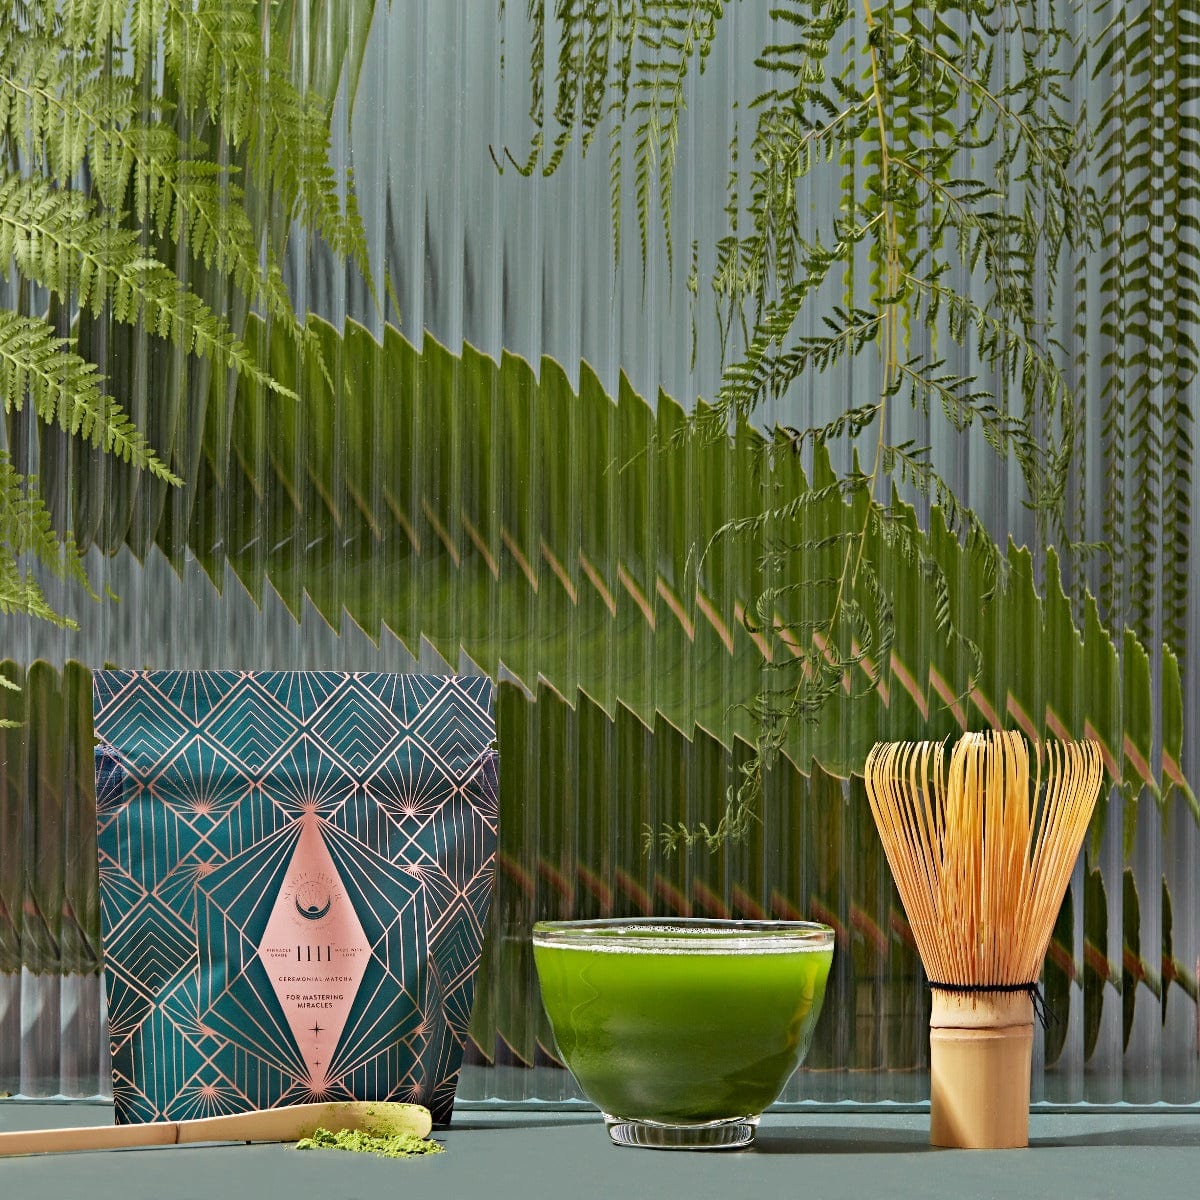 A serene setup featuring a bamboo whisk, a green bowl of matcha tea, and a beautifully designed package of Magic Hour Matcha 1111: Highest Grade of Ceremonial Matcha. The background features glass with a leafy, fern-like pattern, creating a calming, nature-inspired ambiance perfect for enjoying organic tea in your own magic hour.